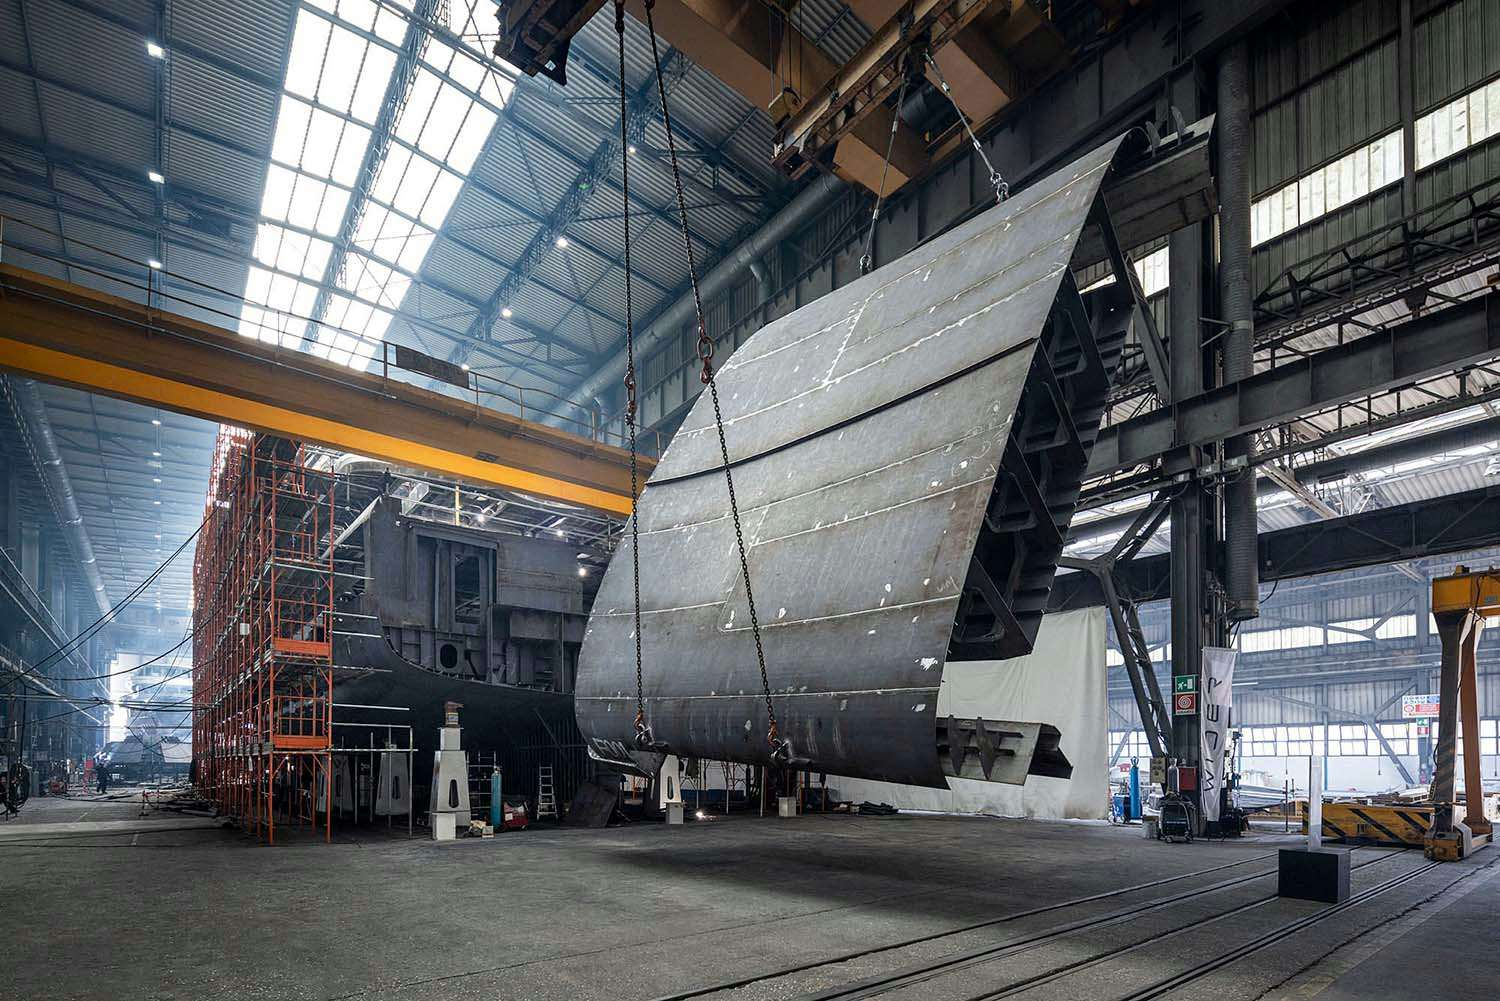 image of the Wider shipyard inside during some sort of yacht construction